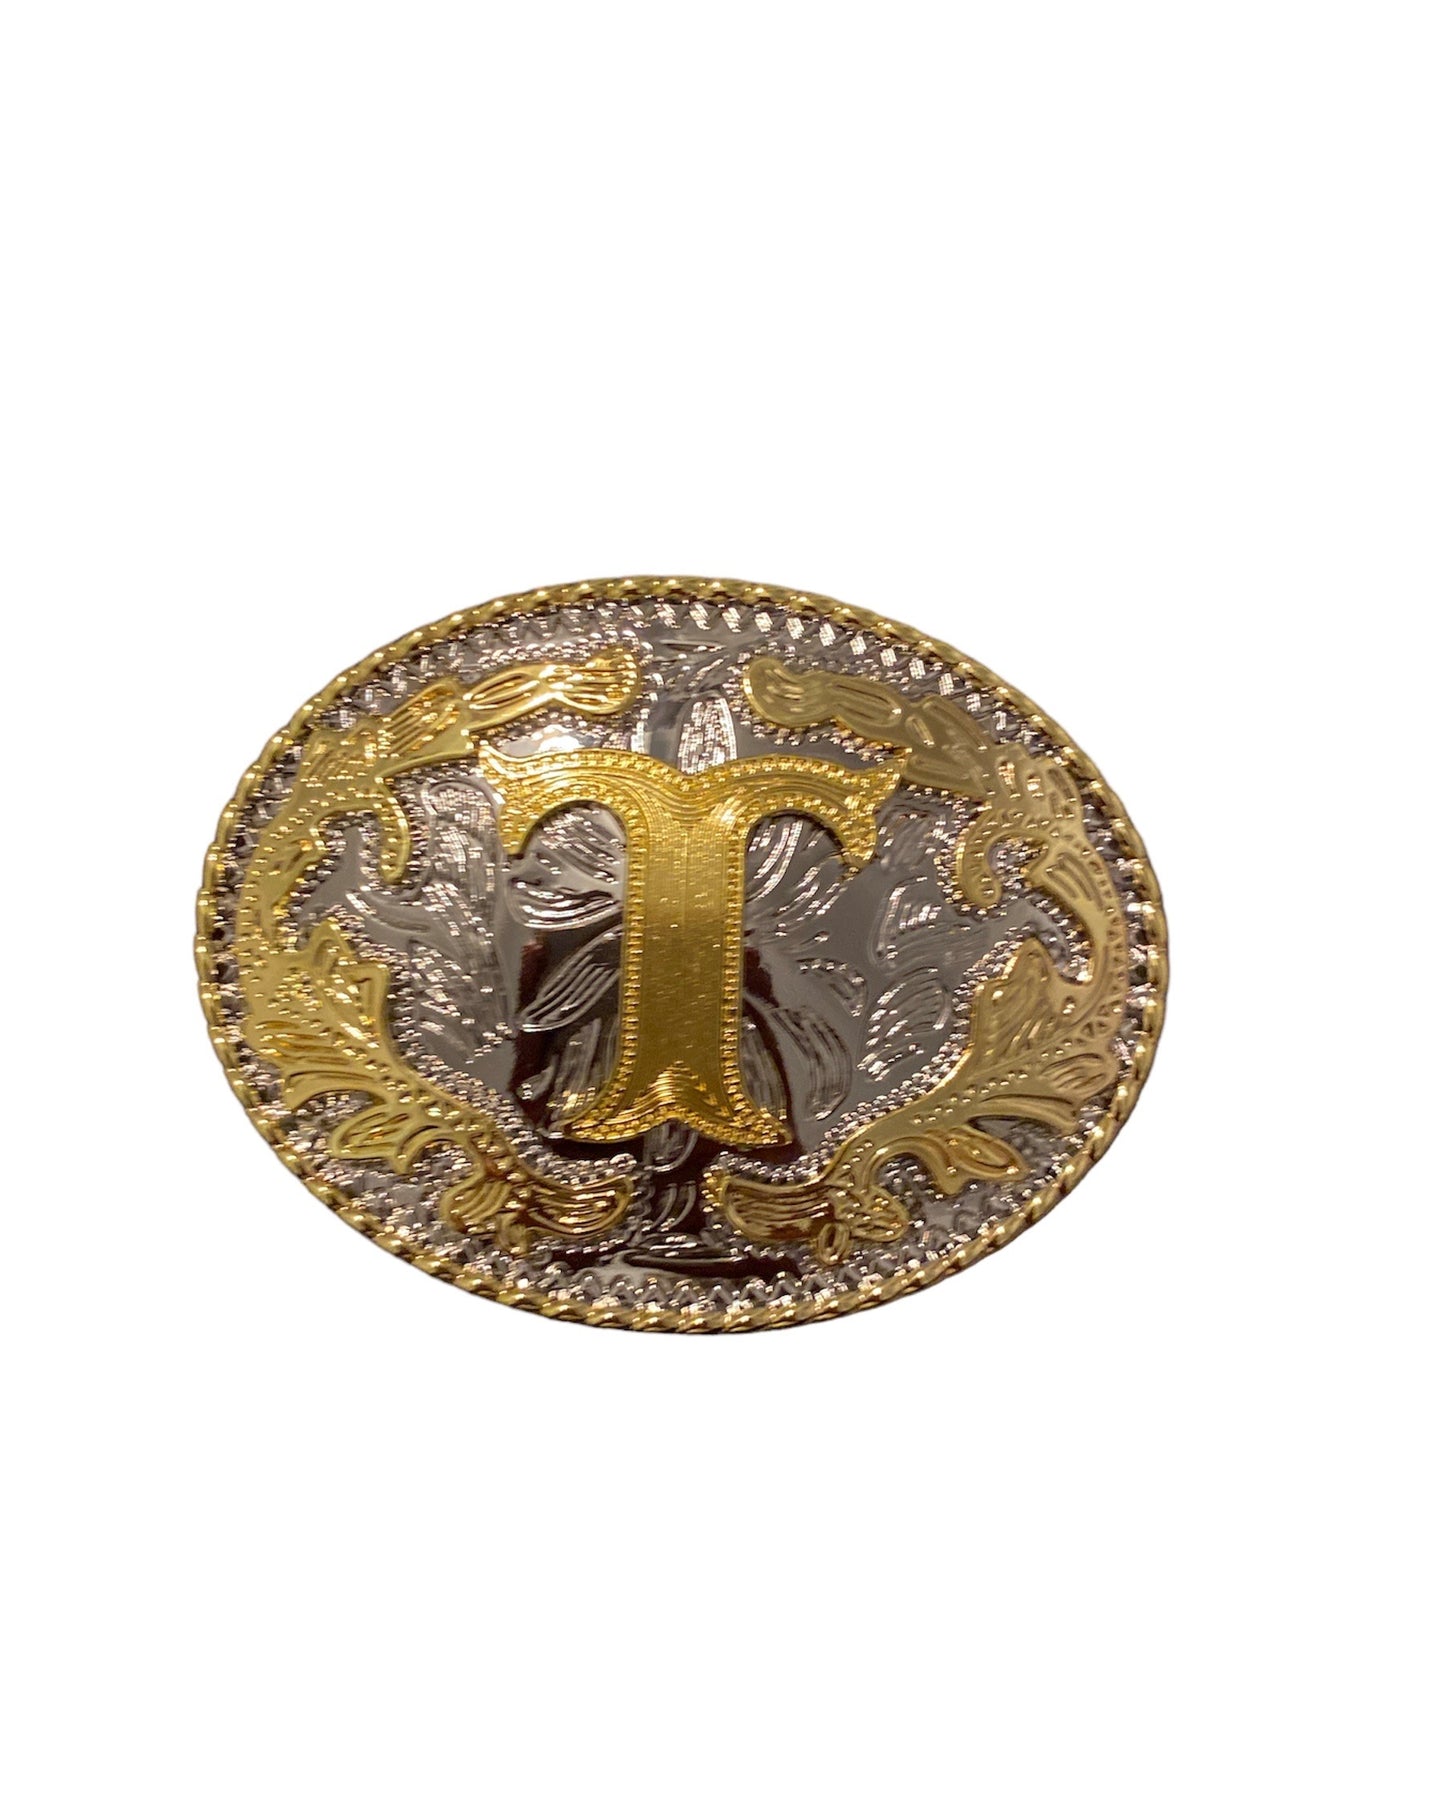 Initial Letter "T" Cowboy Rodeo Western Large Gold Tone Belt Buckle